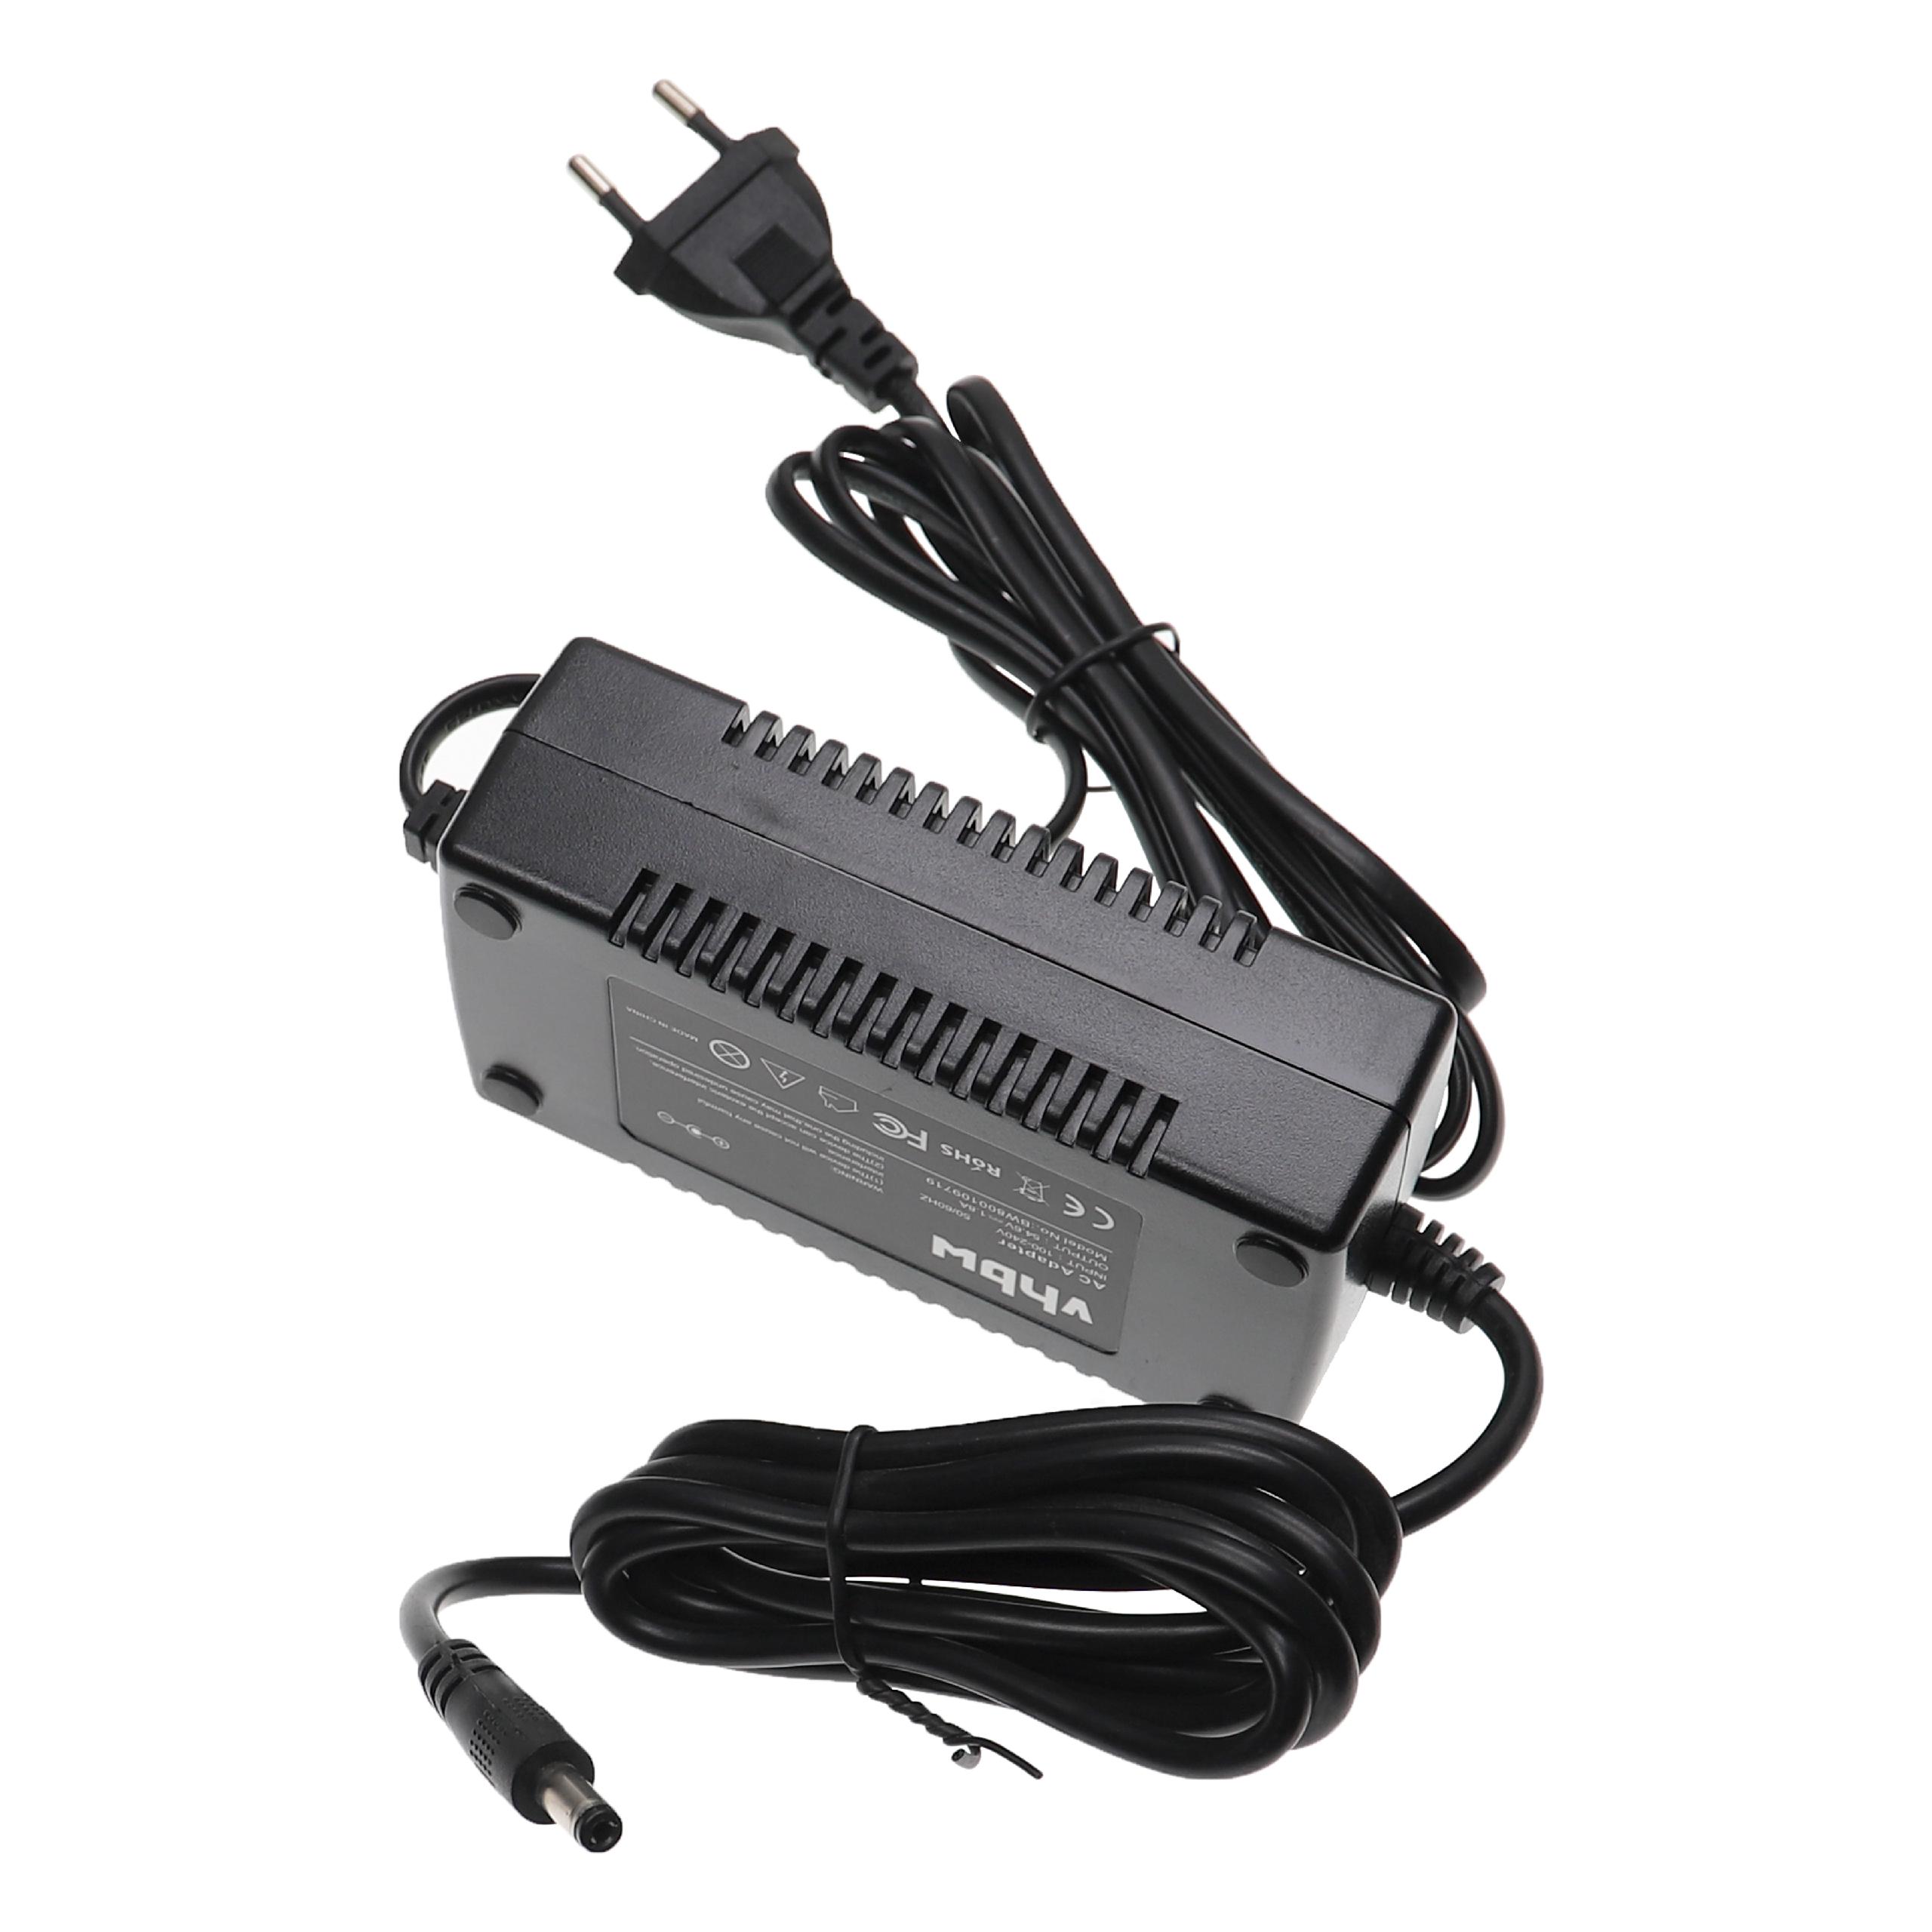 Charger suitable for Li-Ion E-Bike Battery - For 48 V Batteries, With Round Plug, 1.8 A